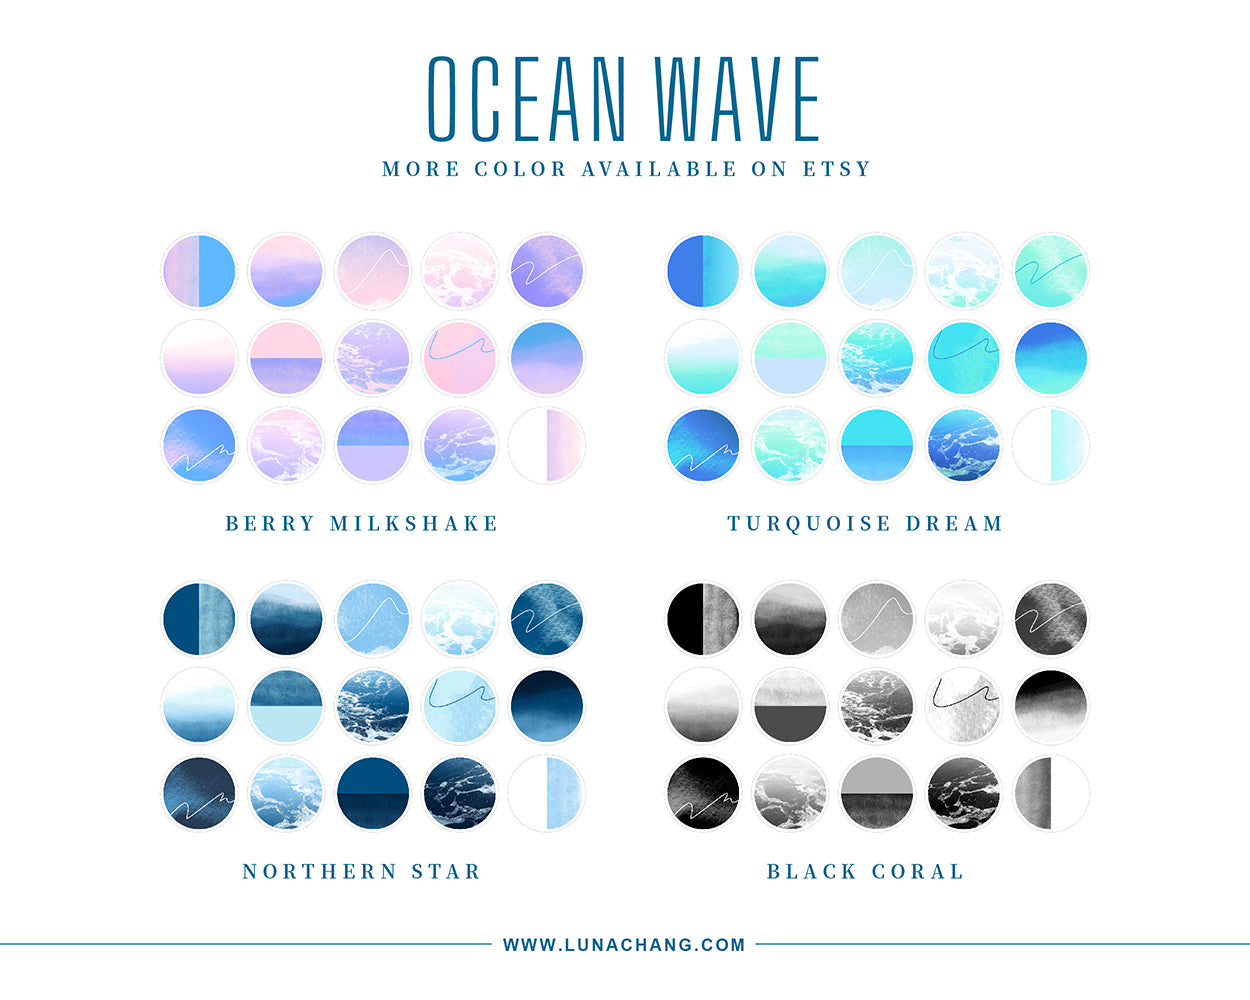 Ocean Wave - Northern Blue | Instagram Story Highlight Icon